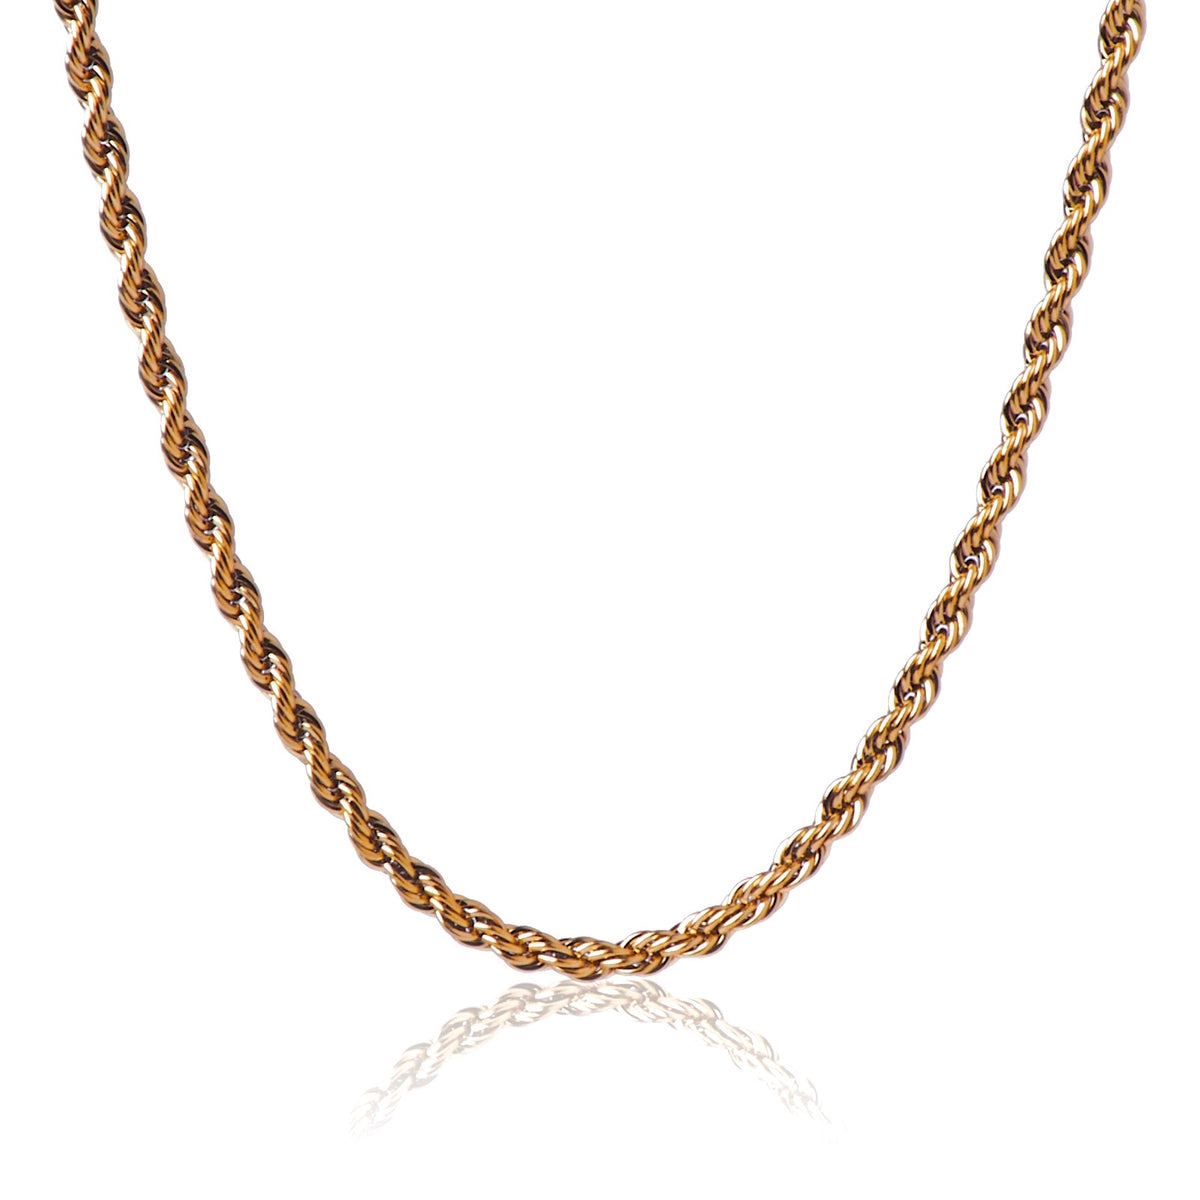 Rope Chain 3mm - Neckontheline